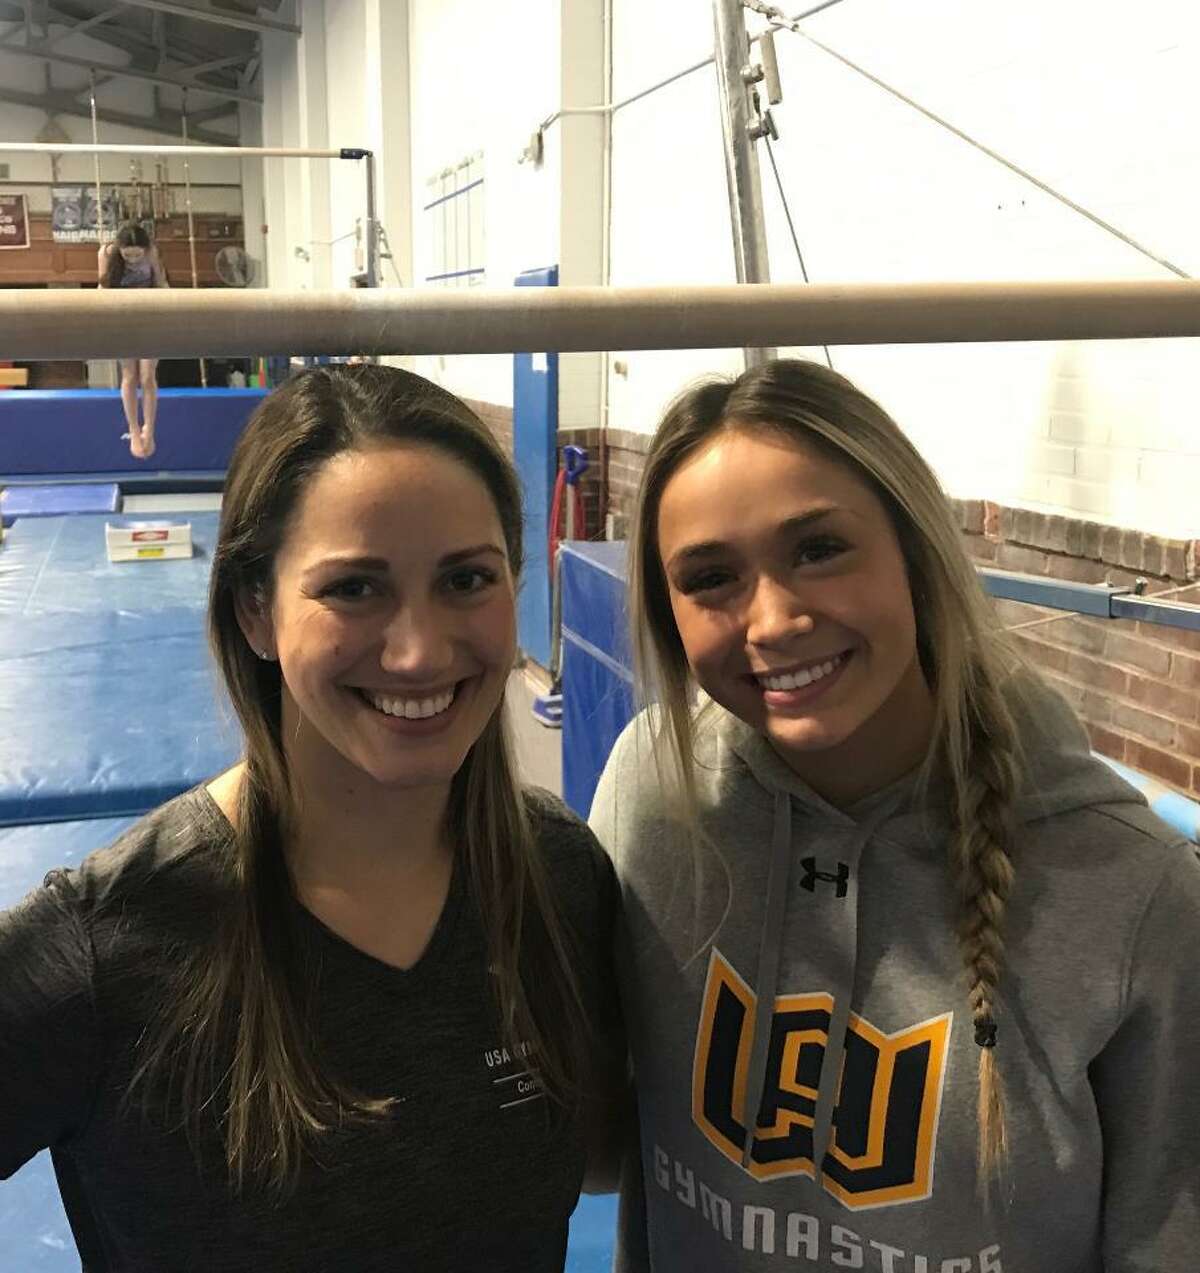 Woodstock Academy gymnastics coach Kasey Tocchio, left, and Taylor Markley, who won each individual event, helped Woodstock Academy to its eighth State Open title in the past 10 years.